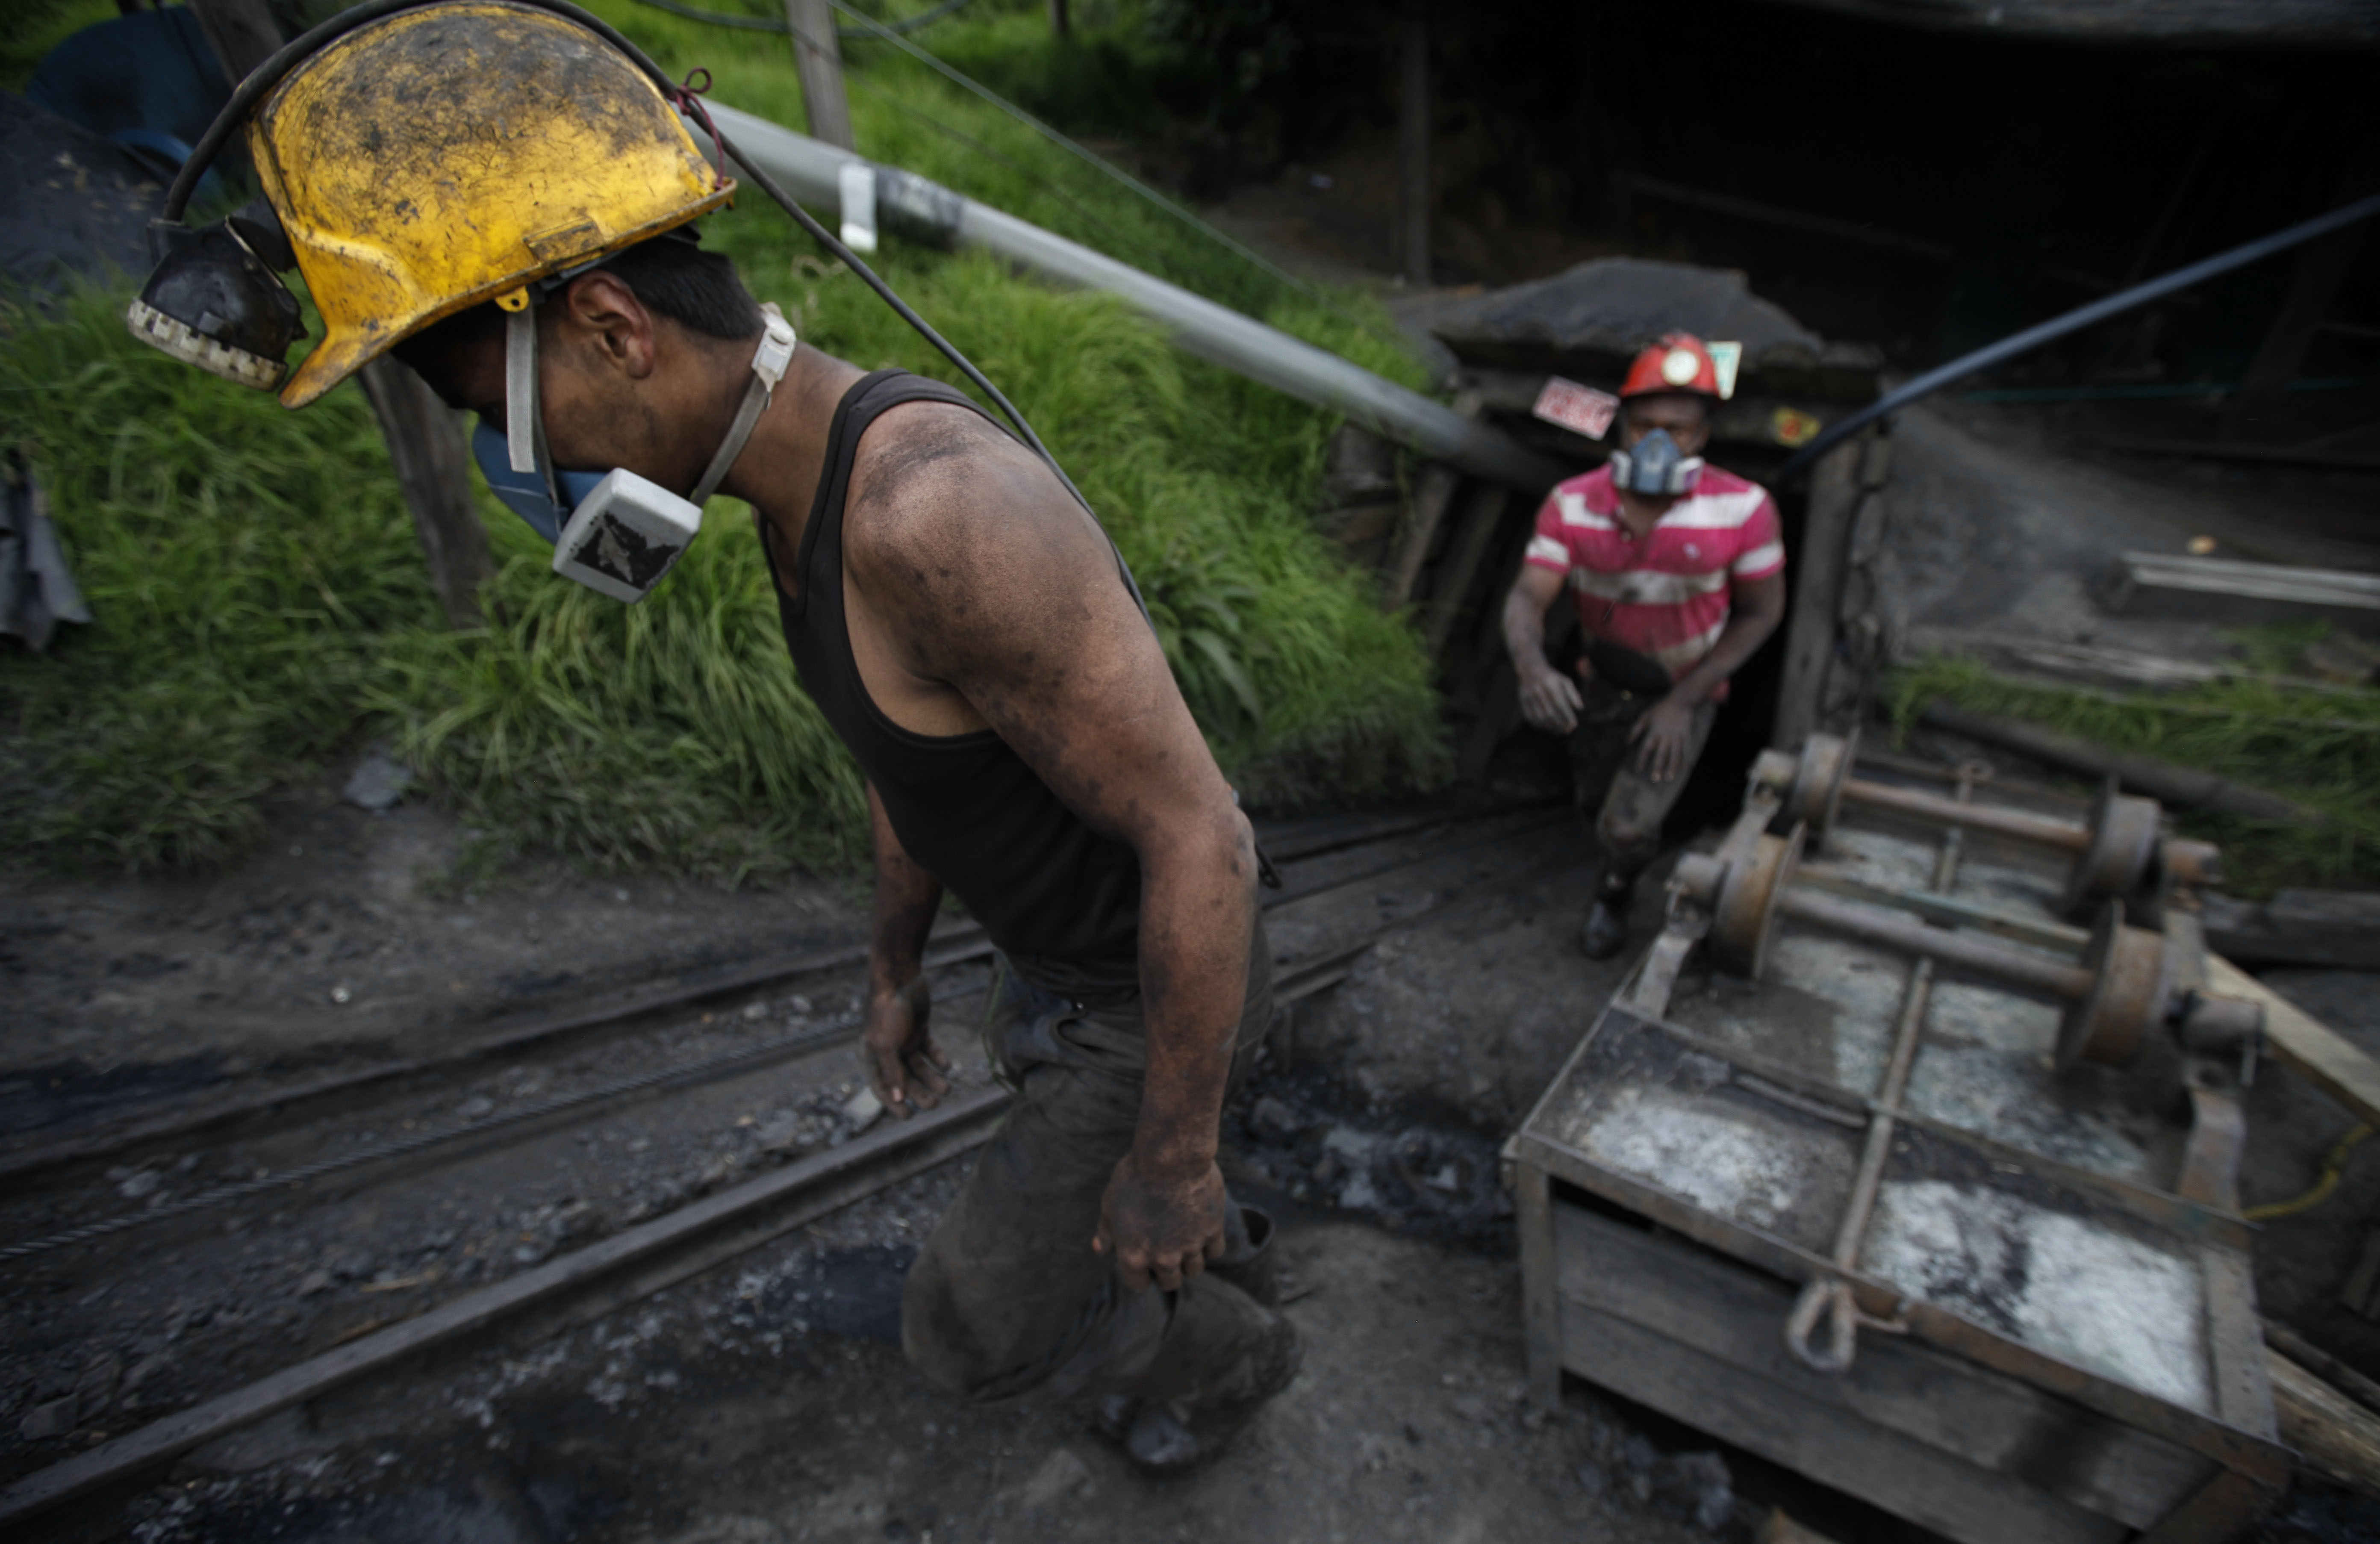 Miners leave the tunnel after their shift at La Flauta coal mine in Tausa, Colombia, Tuesday, Sept. 24, 2013. Tausa residents fear that La Flauta will be closed if authorities declare the area a nature reserve in which mining is prohibited. (AP Photo/Fernando Vergara)